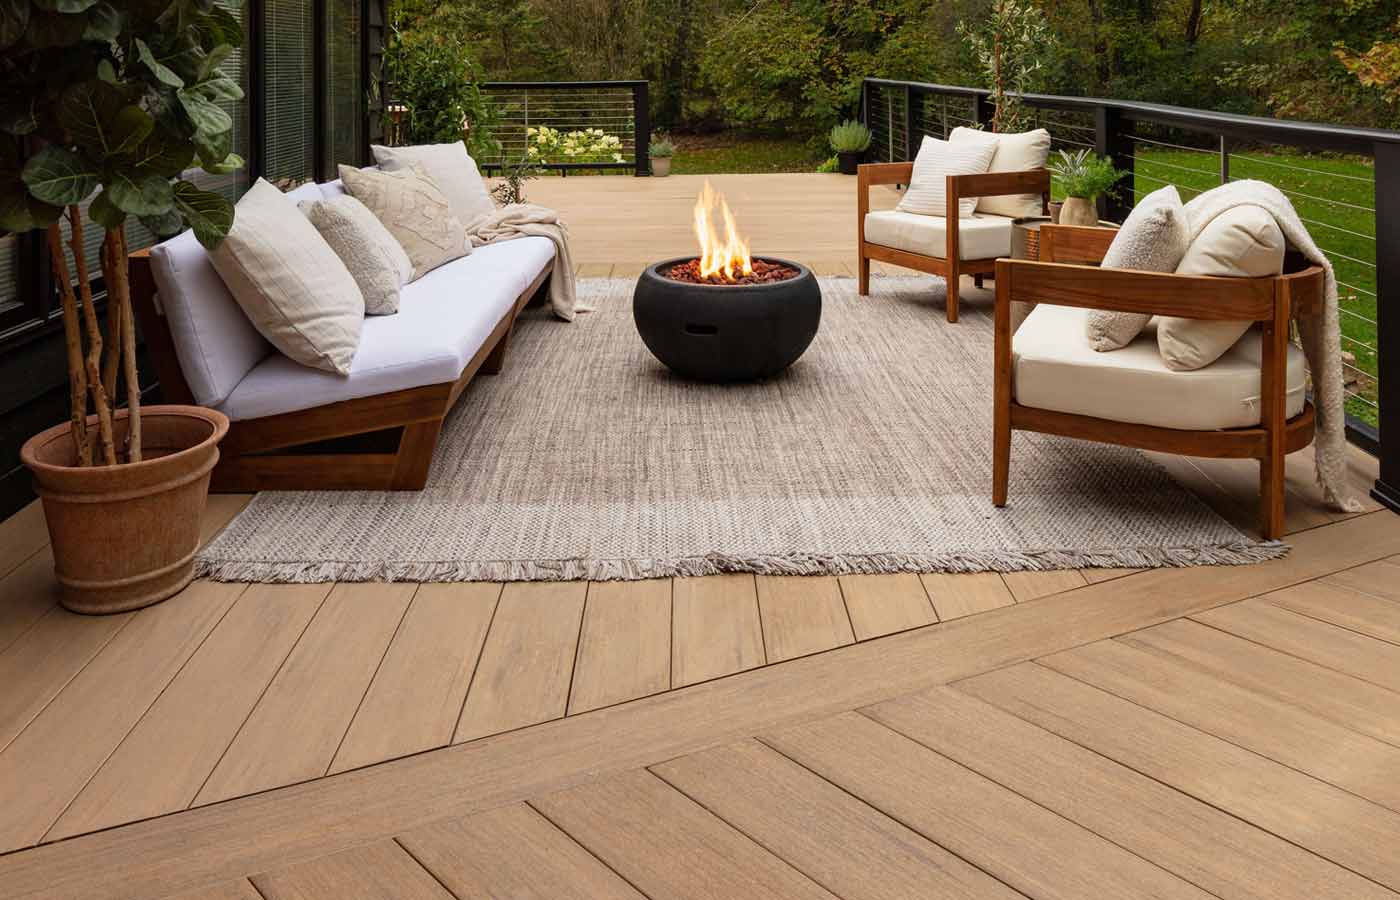 Outdoor sitting space with firepit featuring engineered decking from TimberTech